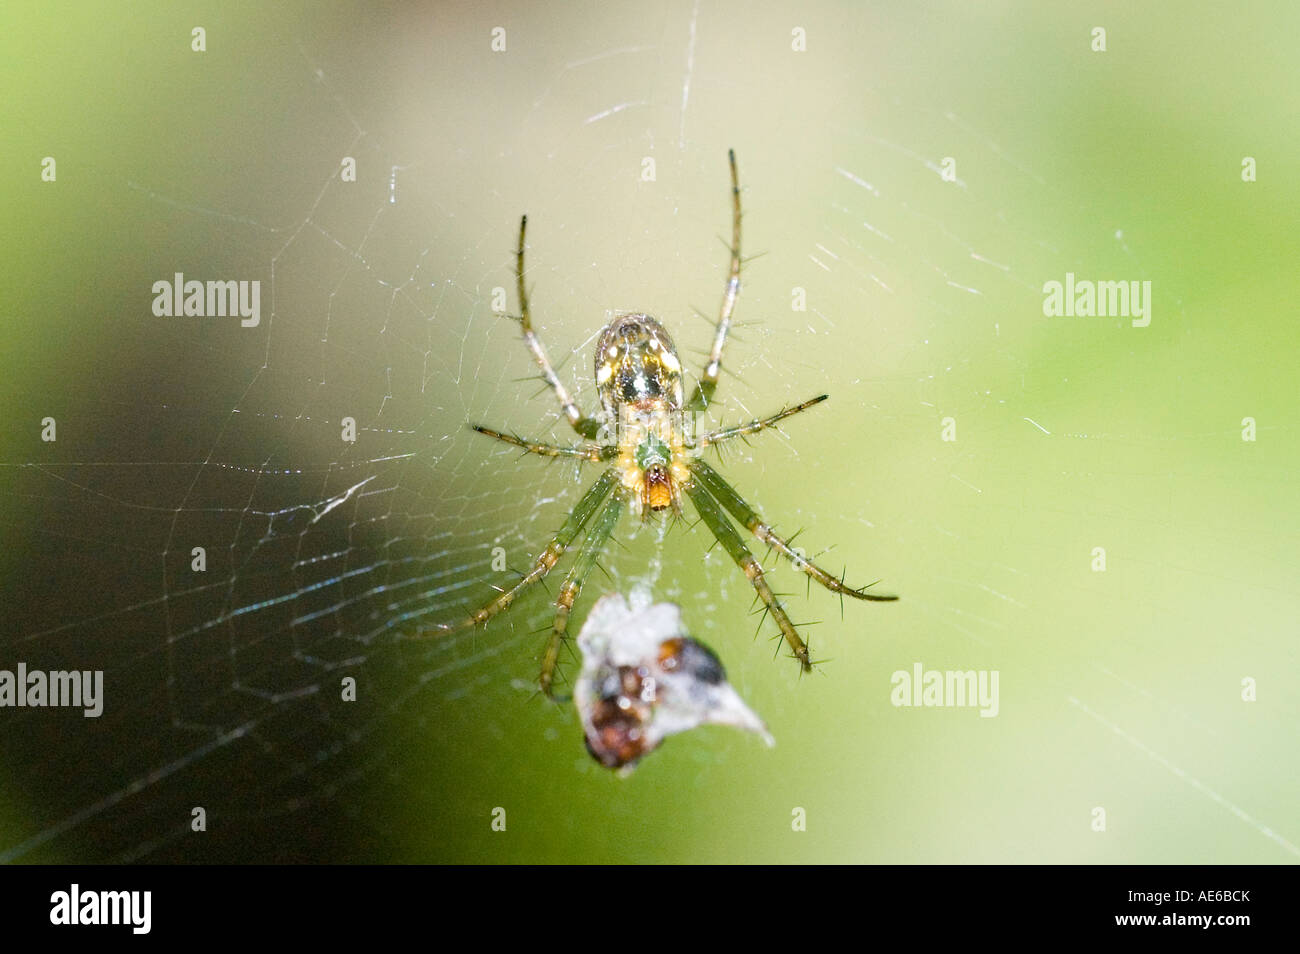 Spider wrapping its prey in silk in a web Stock Photo